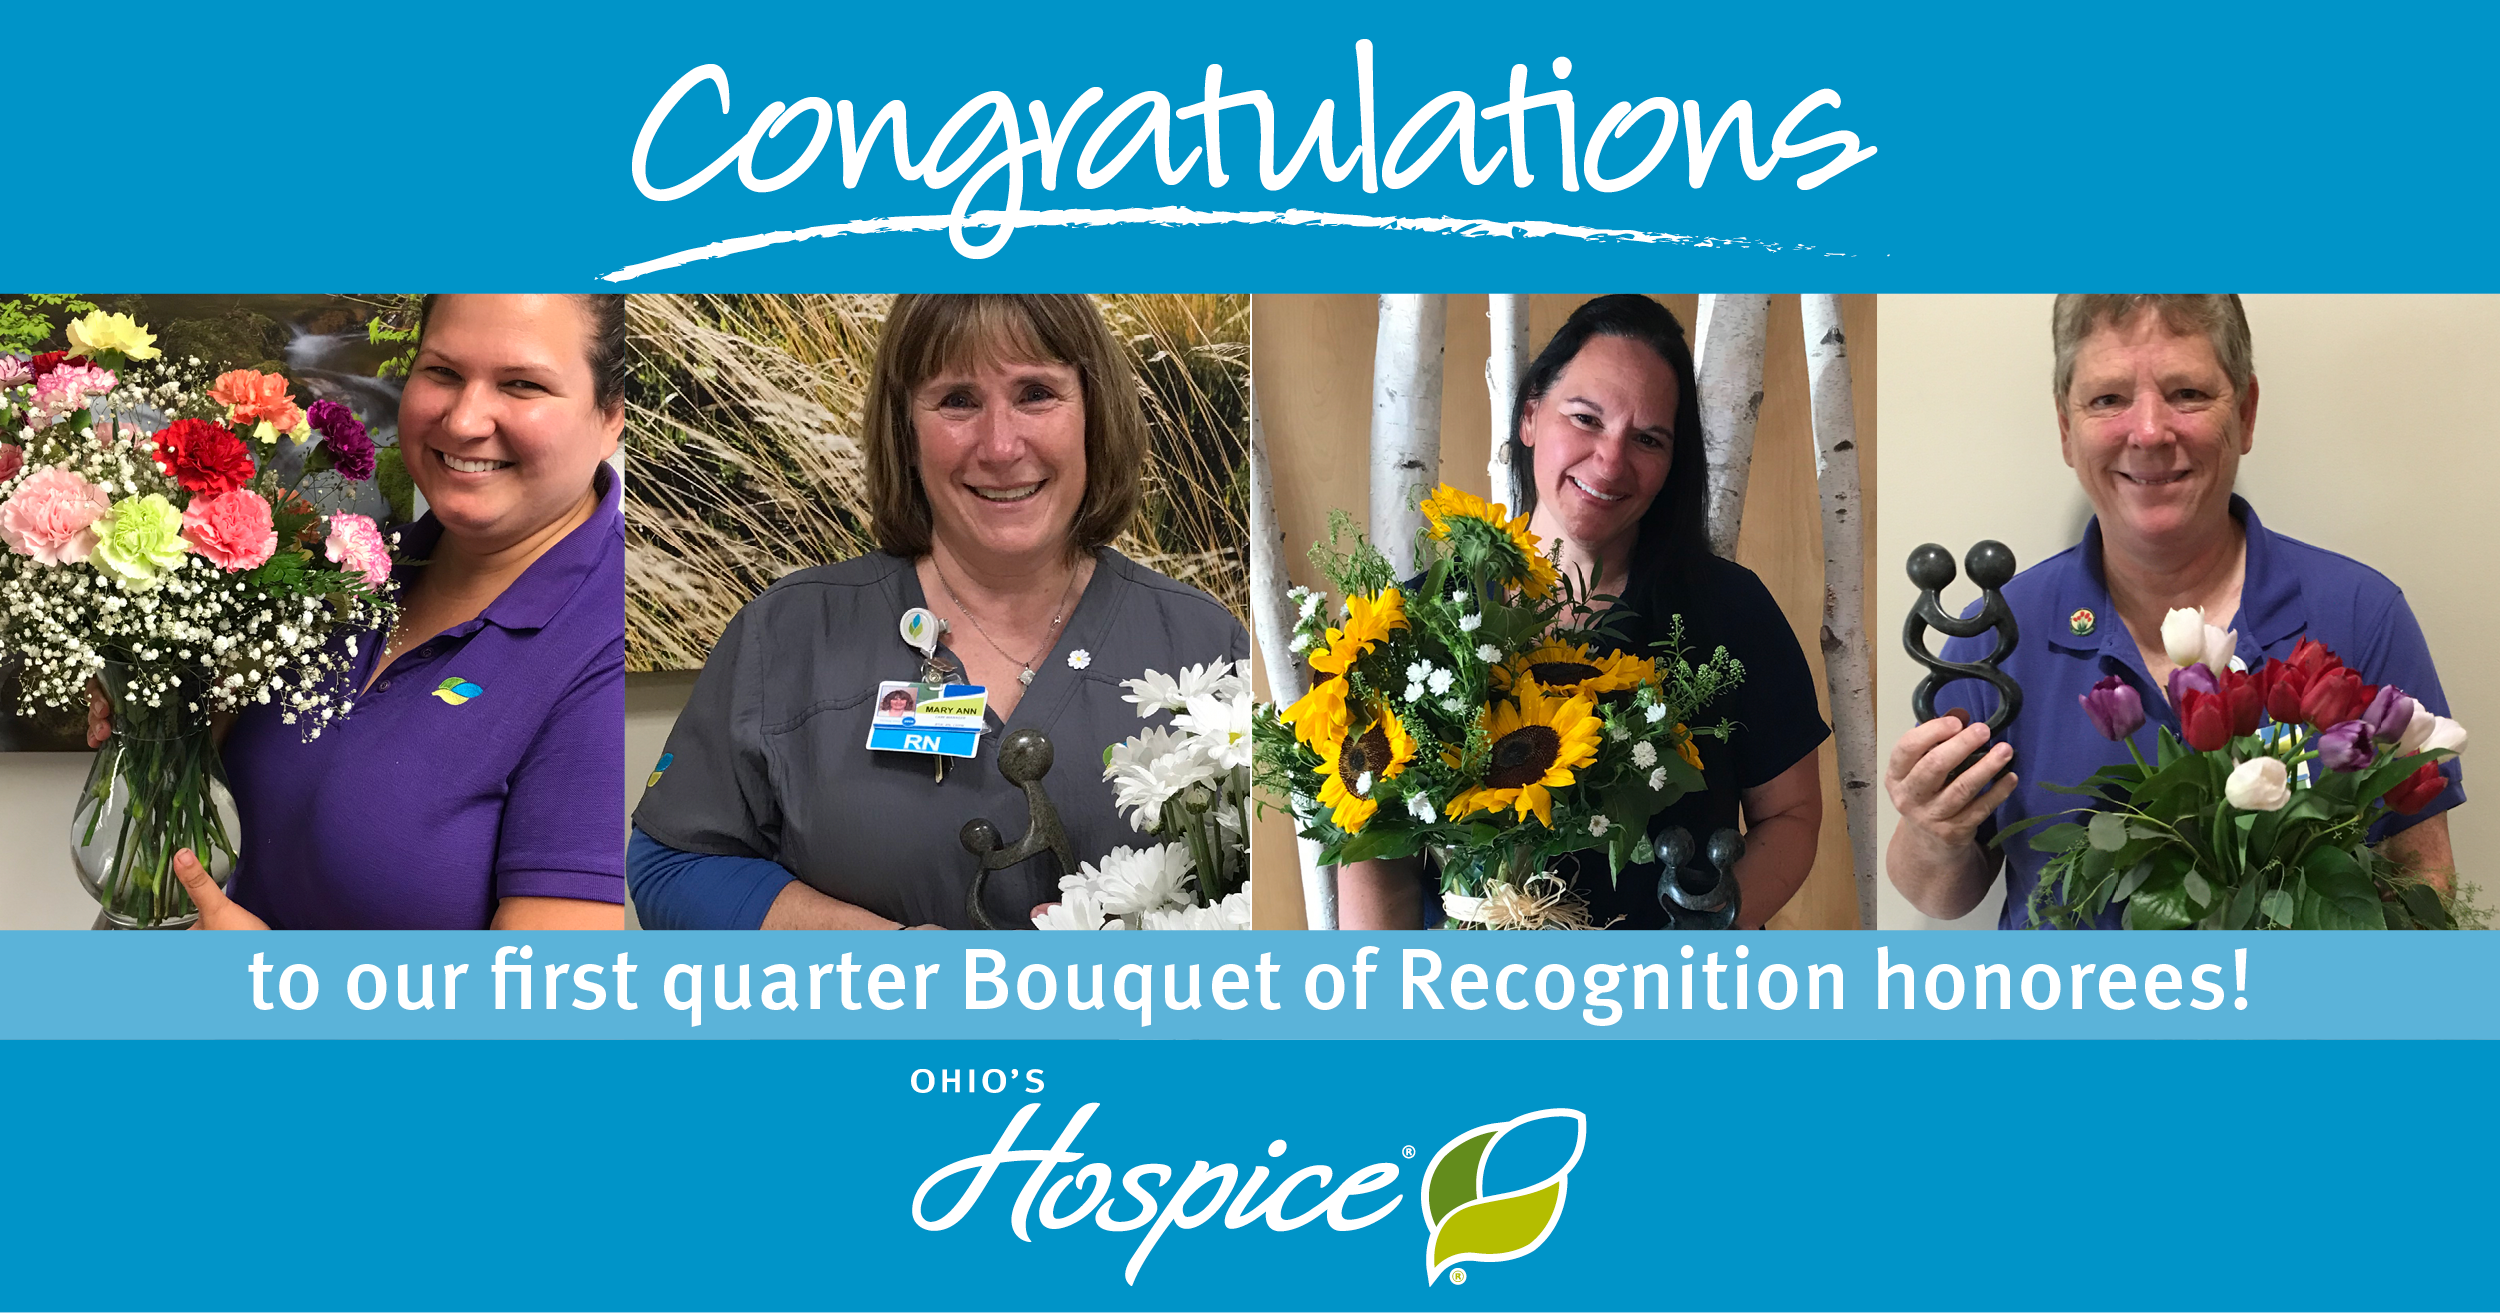 Congratulations to our first quarter Bouquet of Recognition honorees!